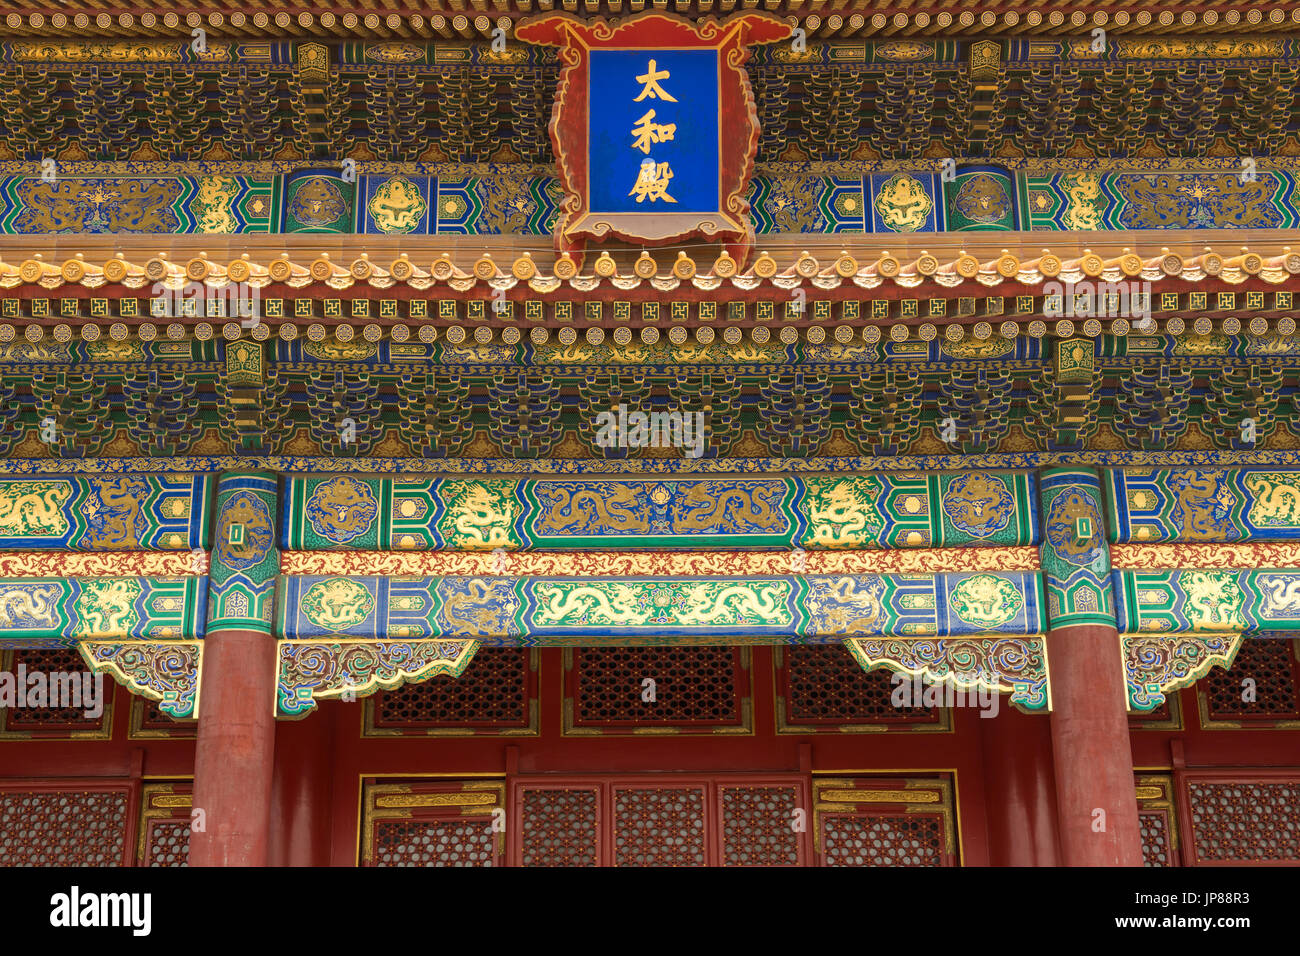 Closeup showing intricate design of Hall of Supreme Harmony in Forbidden City in Beijing China Stock Photo